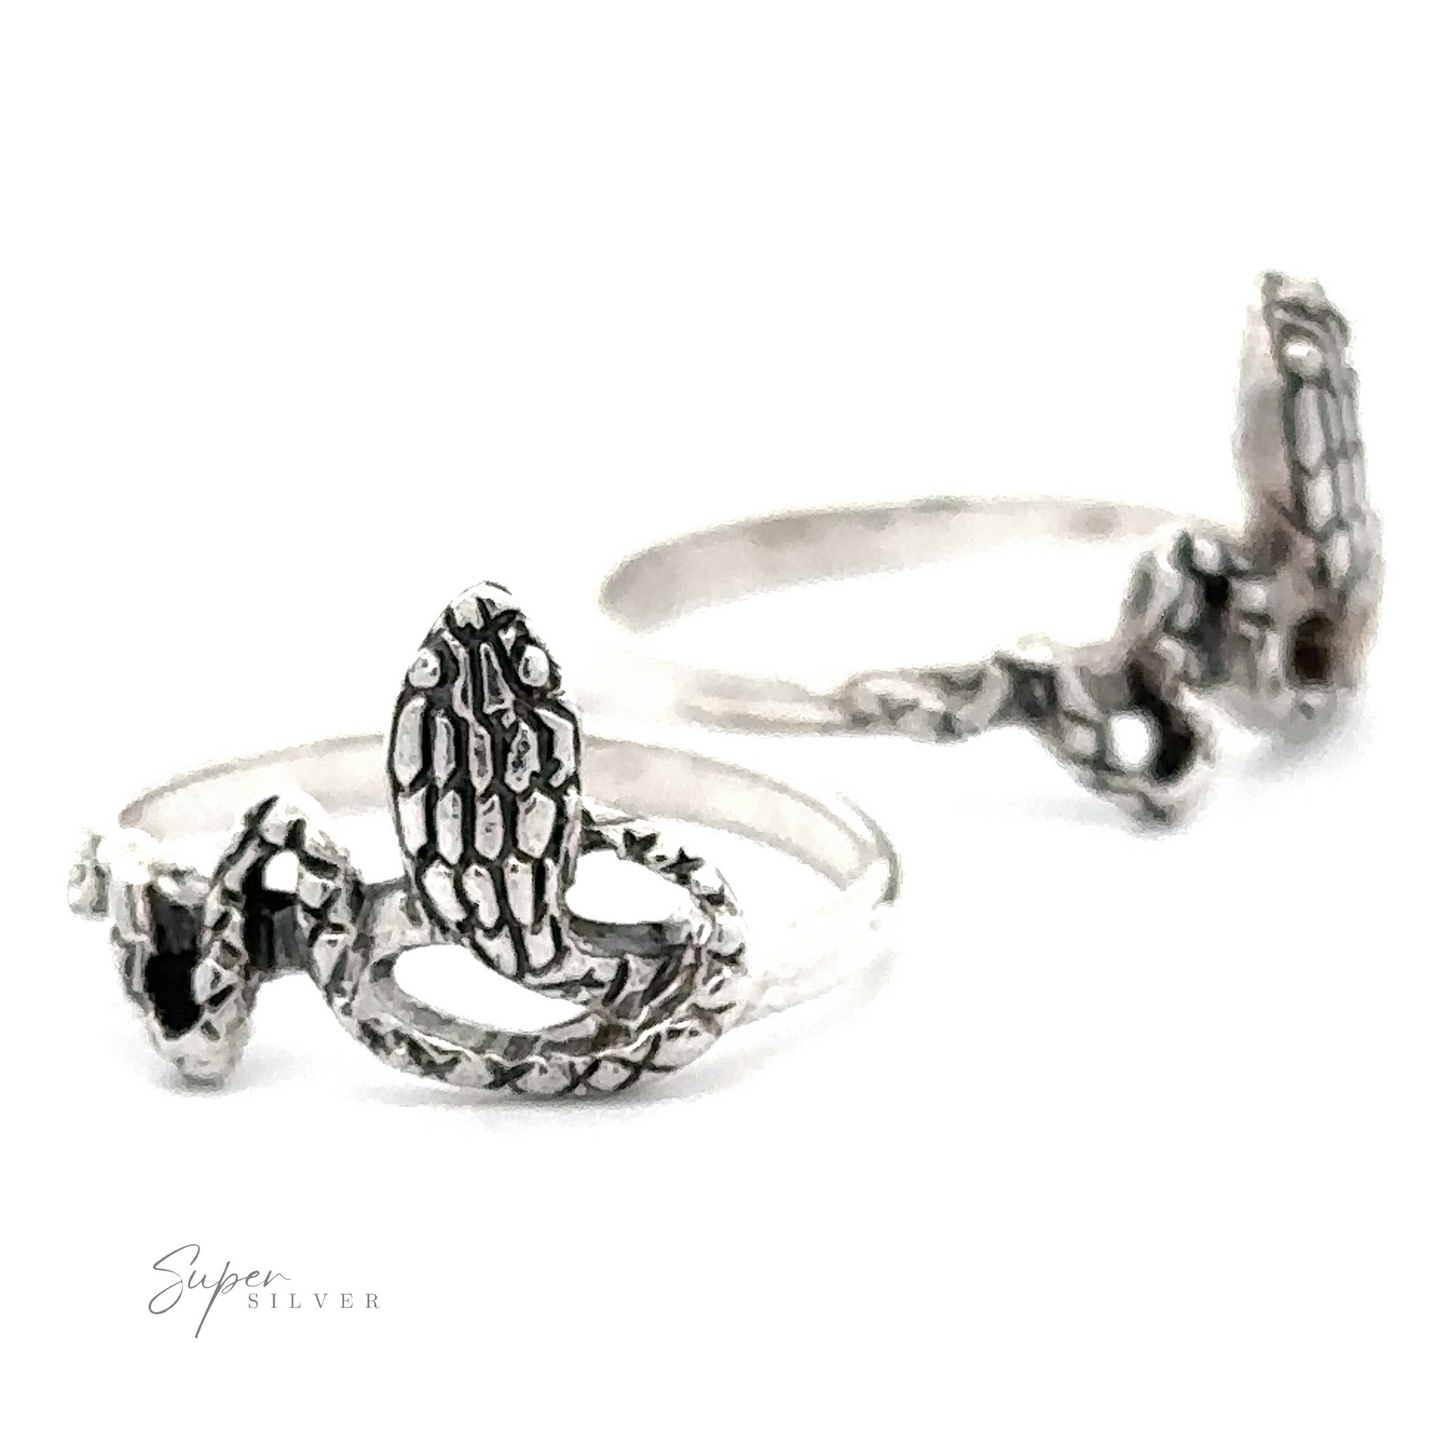 Wavy Coiled Snake Ring featuring an intricate mermaid design, displayed against a white background.